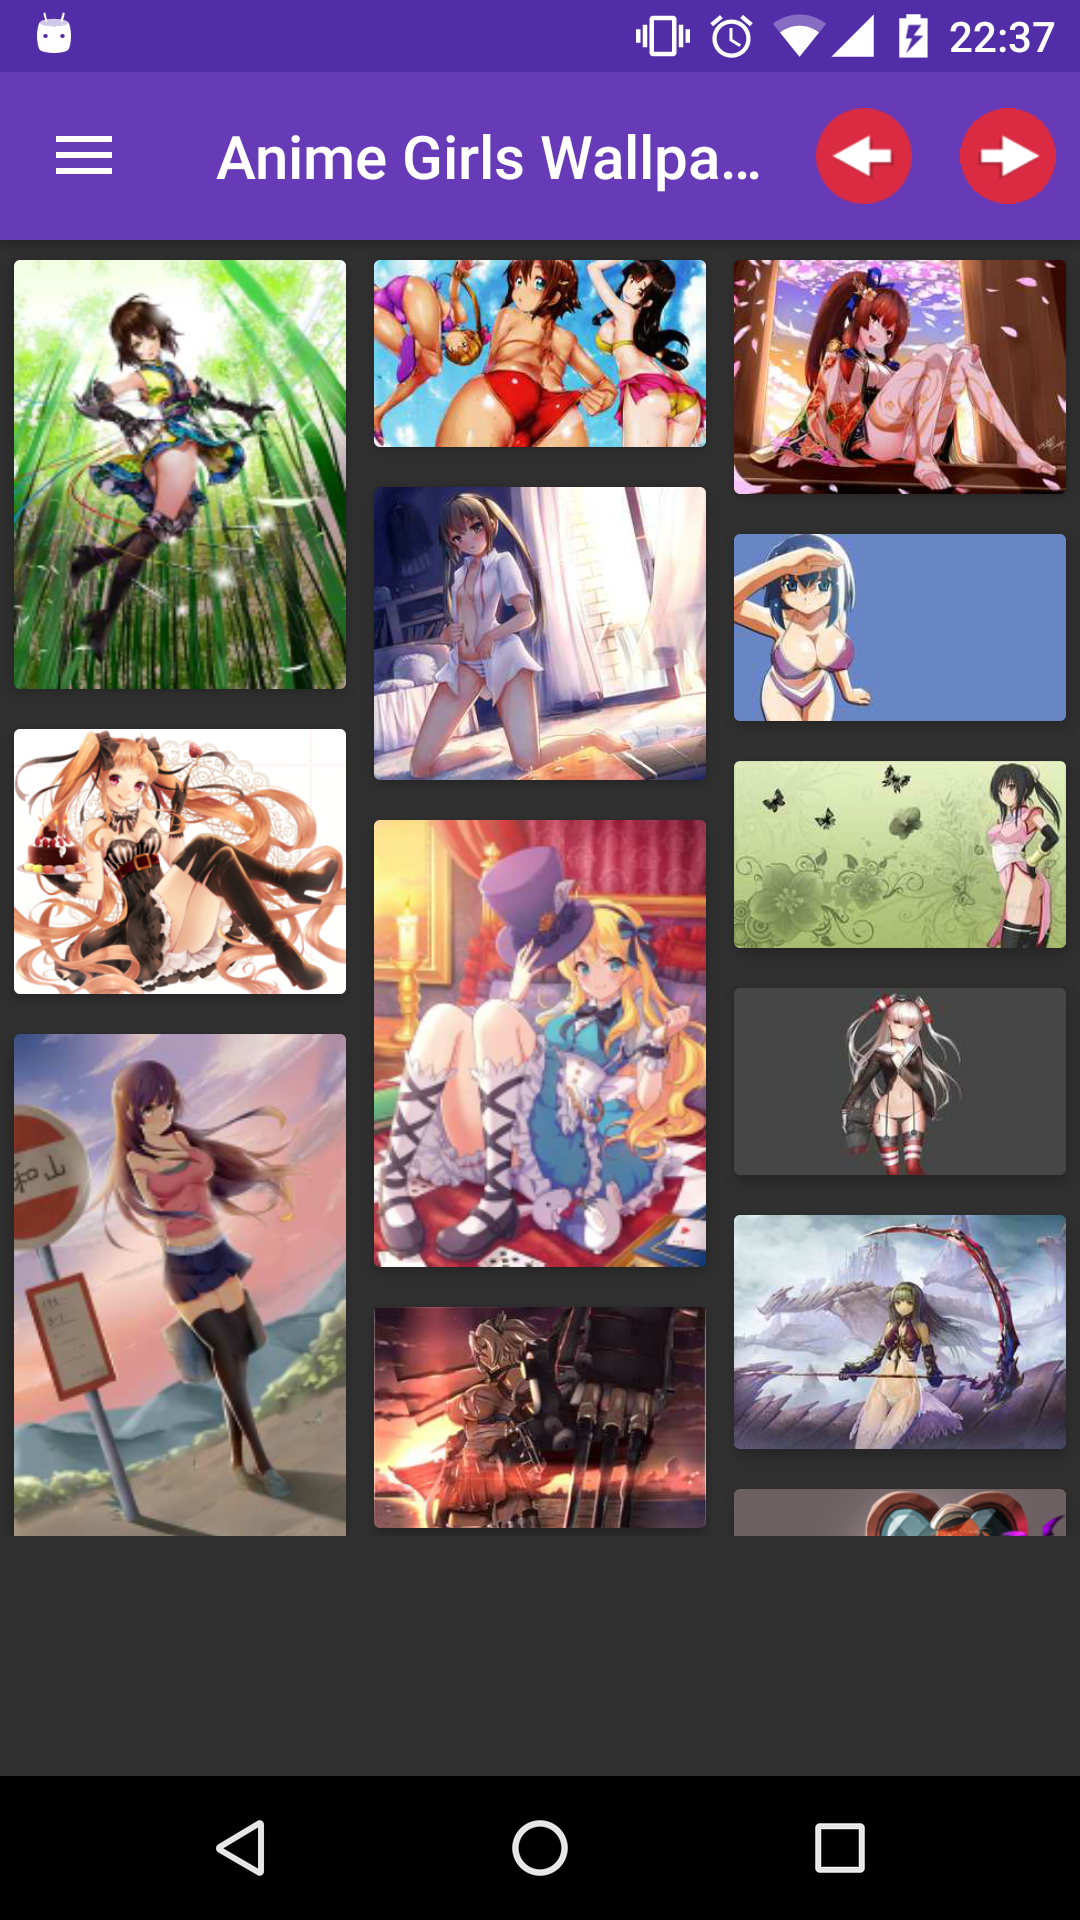 Anime Girls Backgrounds sex,manga,and,anime,editor,sexy,strapon,gallery,porn,puzzles,caprice,panties,backgrounds,photos,girls,hentai,wallpapers,apps,adult,photo,hentie,pic,apk,app,android